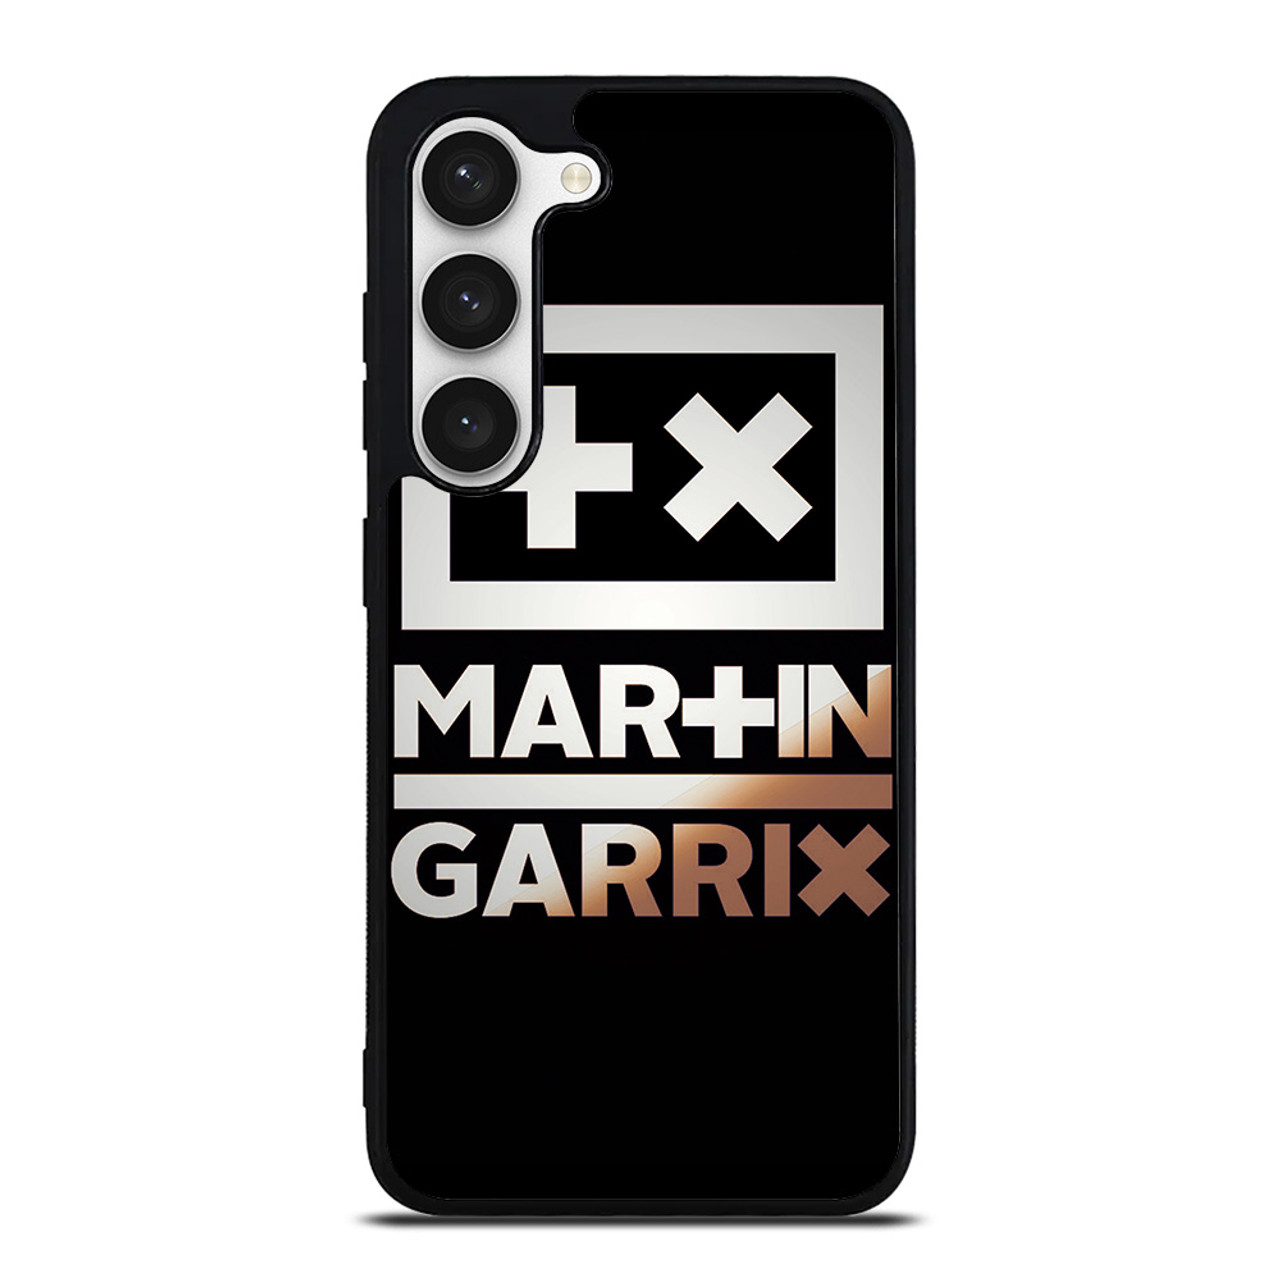 Searched for Garrix wallpapers so much but never came across any good ones  so I went ahead and made one! Let me know if y'all want more! : r/ Martingarrix